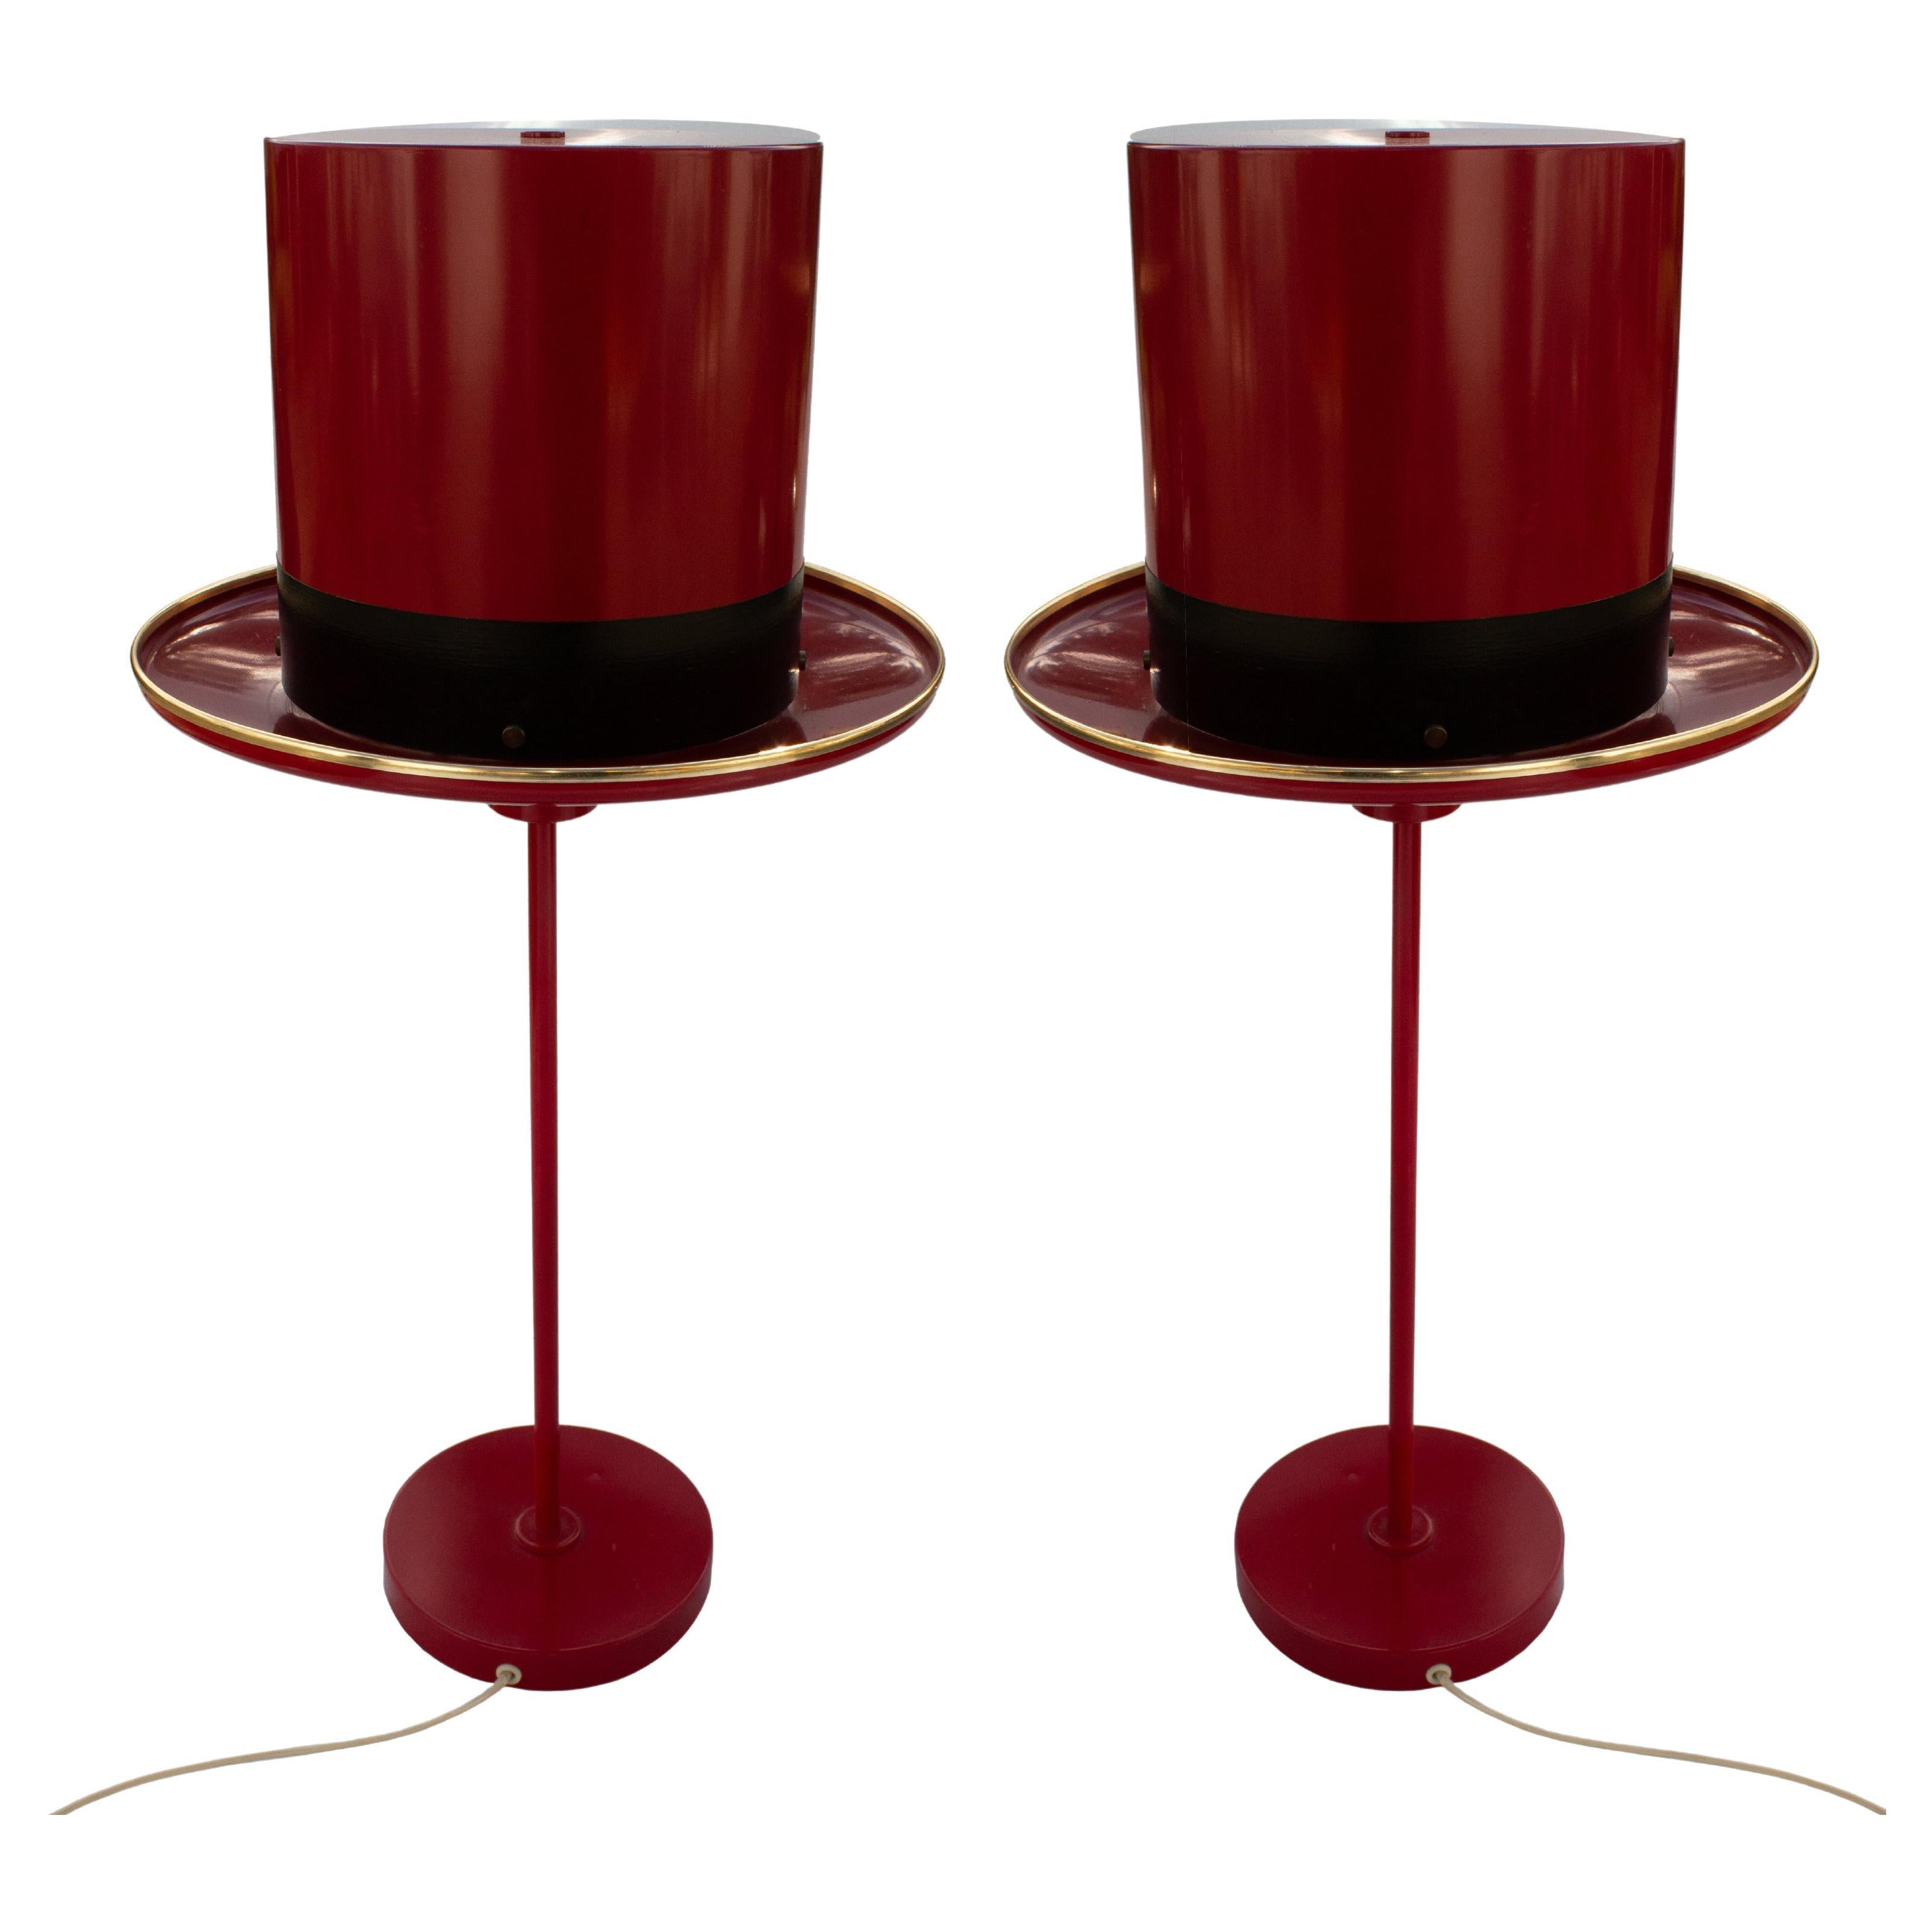 Pair of Scandinavian Modern Hans-Agne Jacobsson Red Table Lamps For Sale